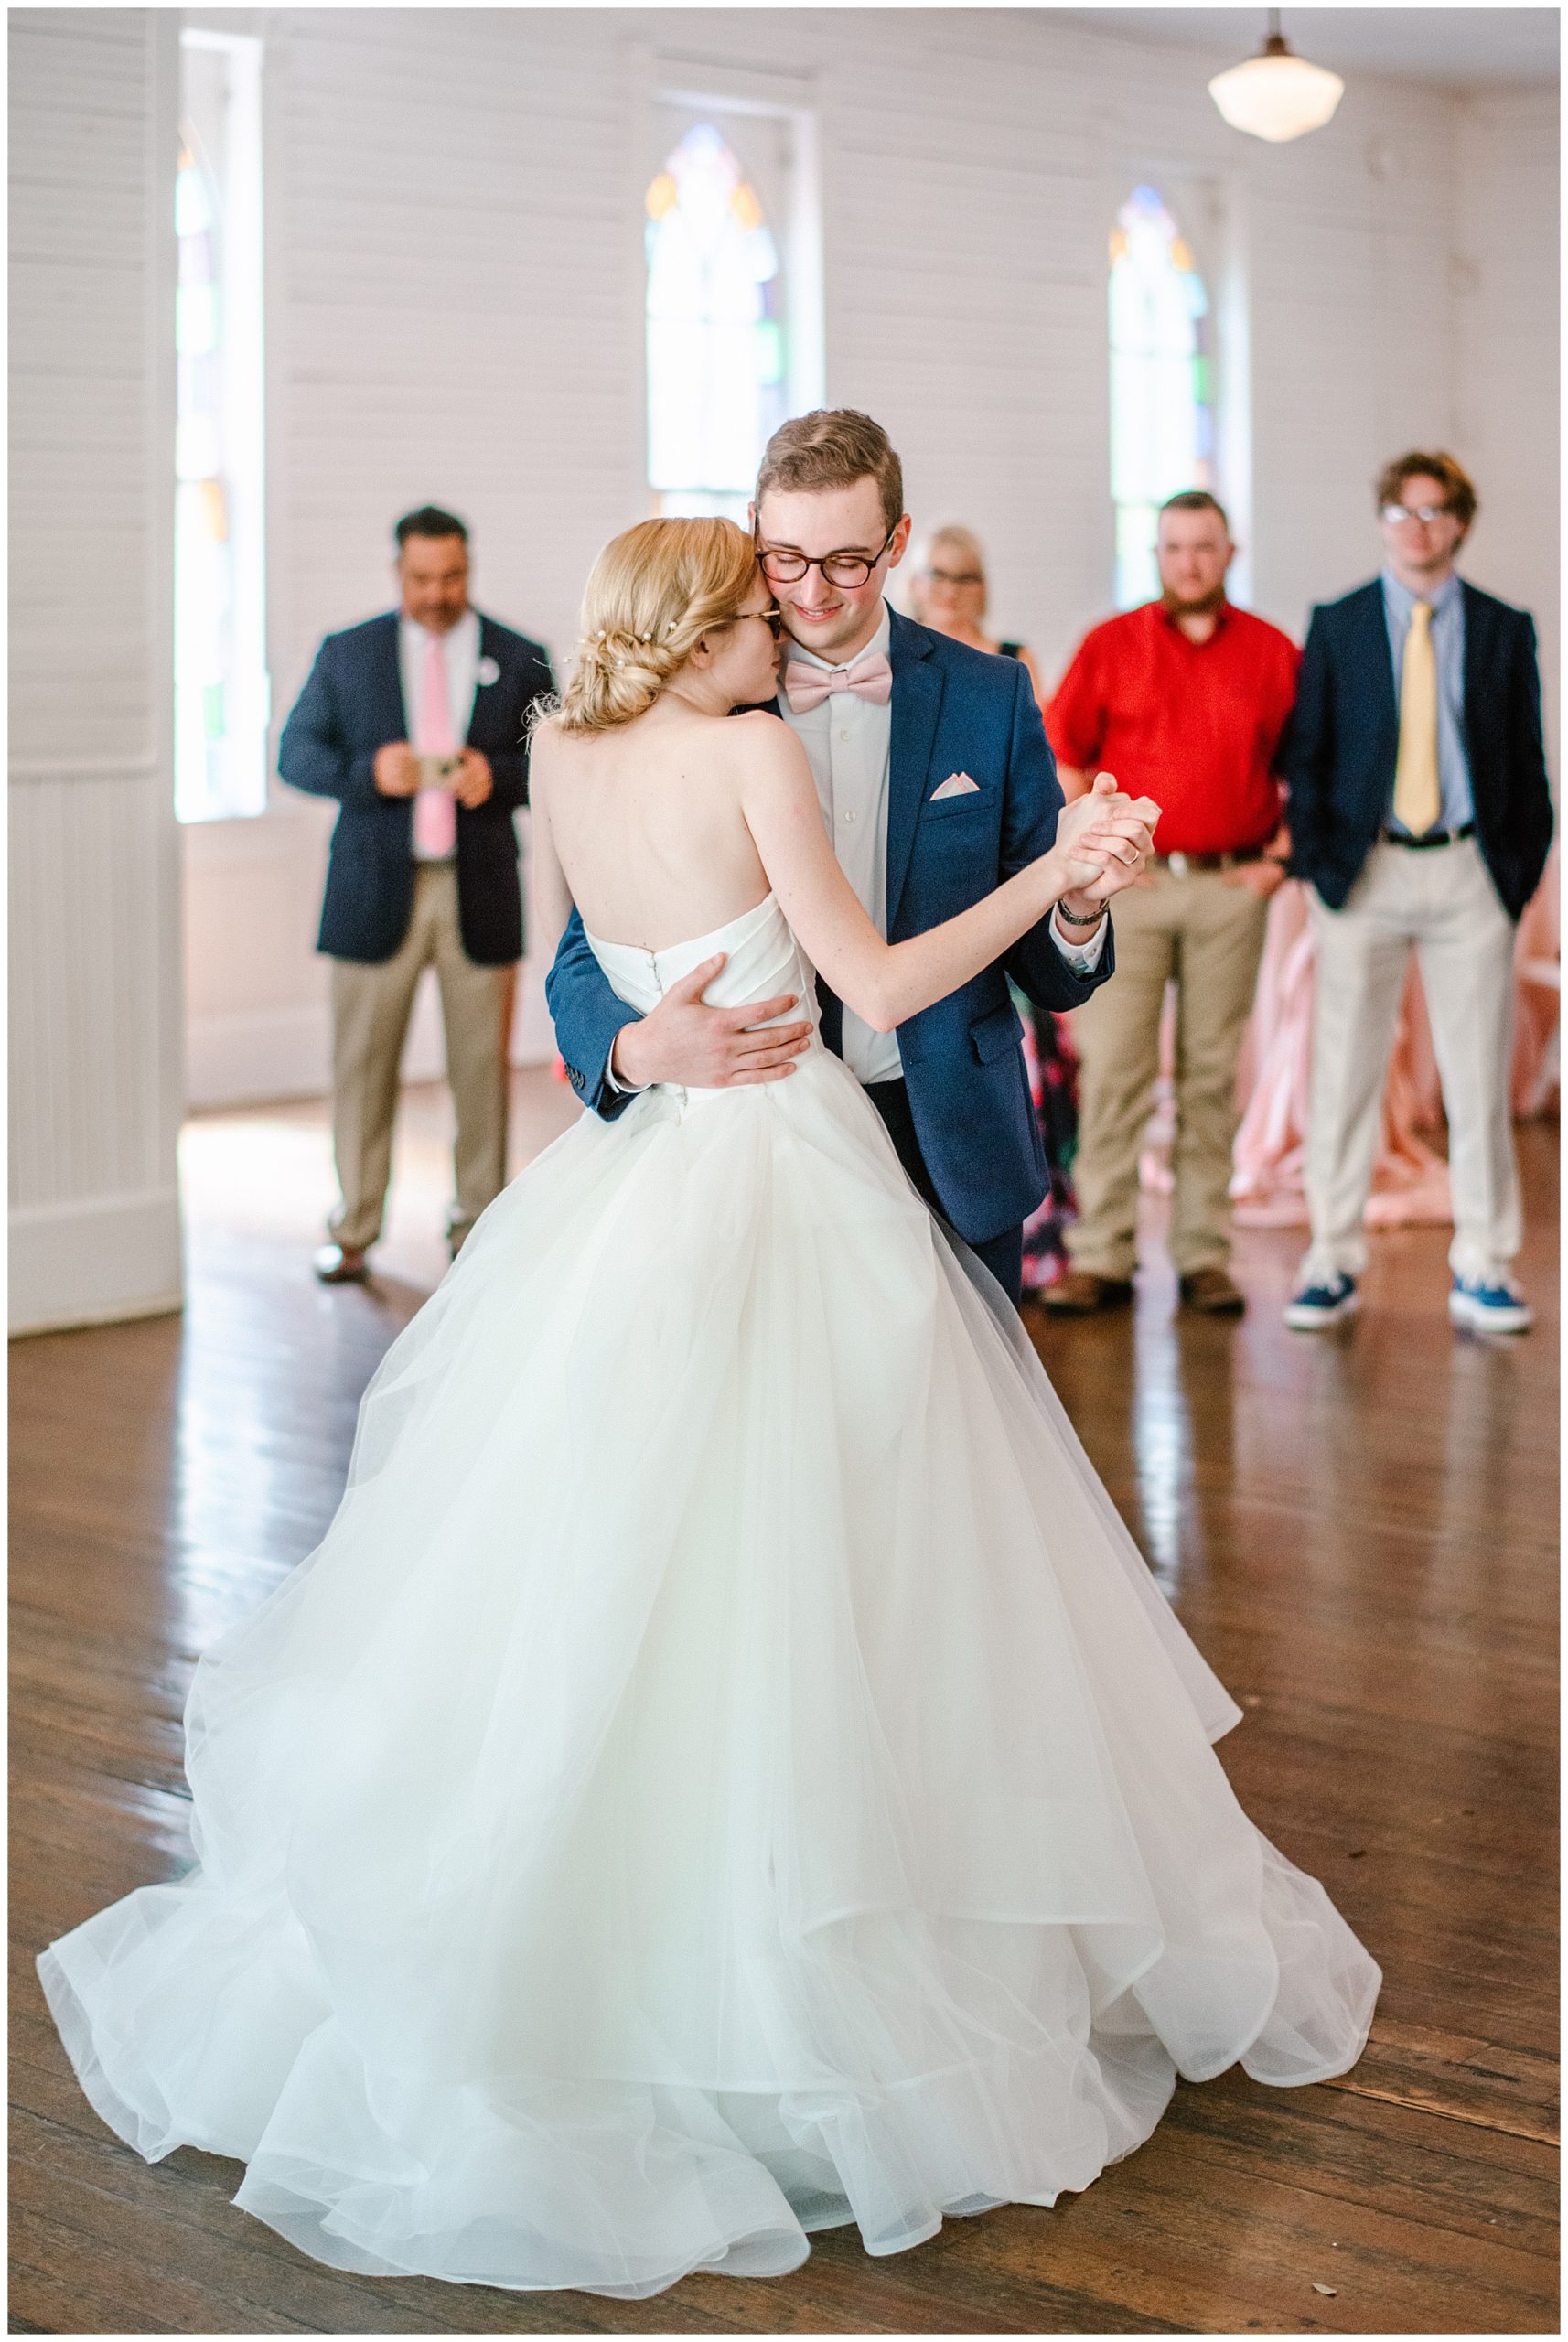 Beautiful couple first dance at intimate wedding